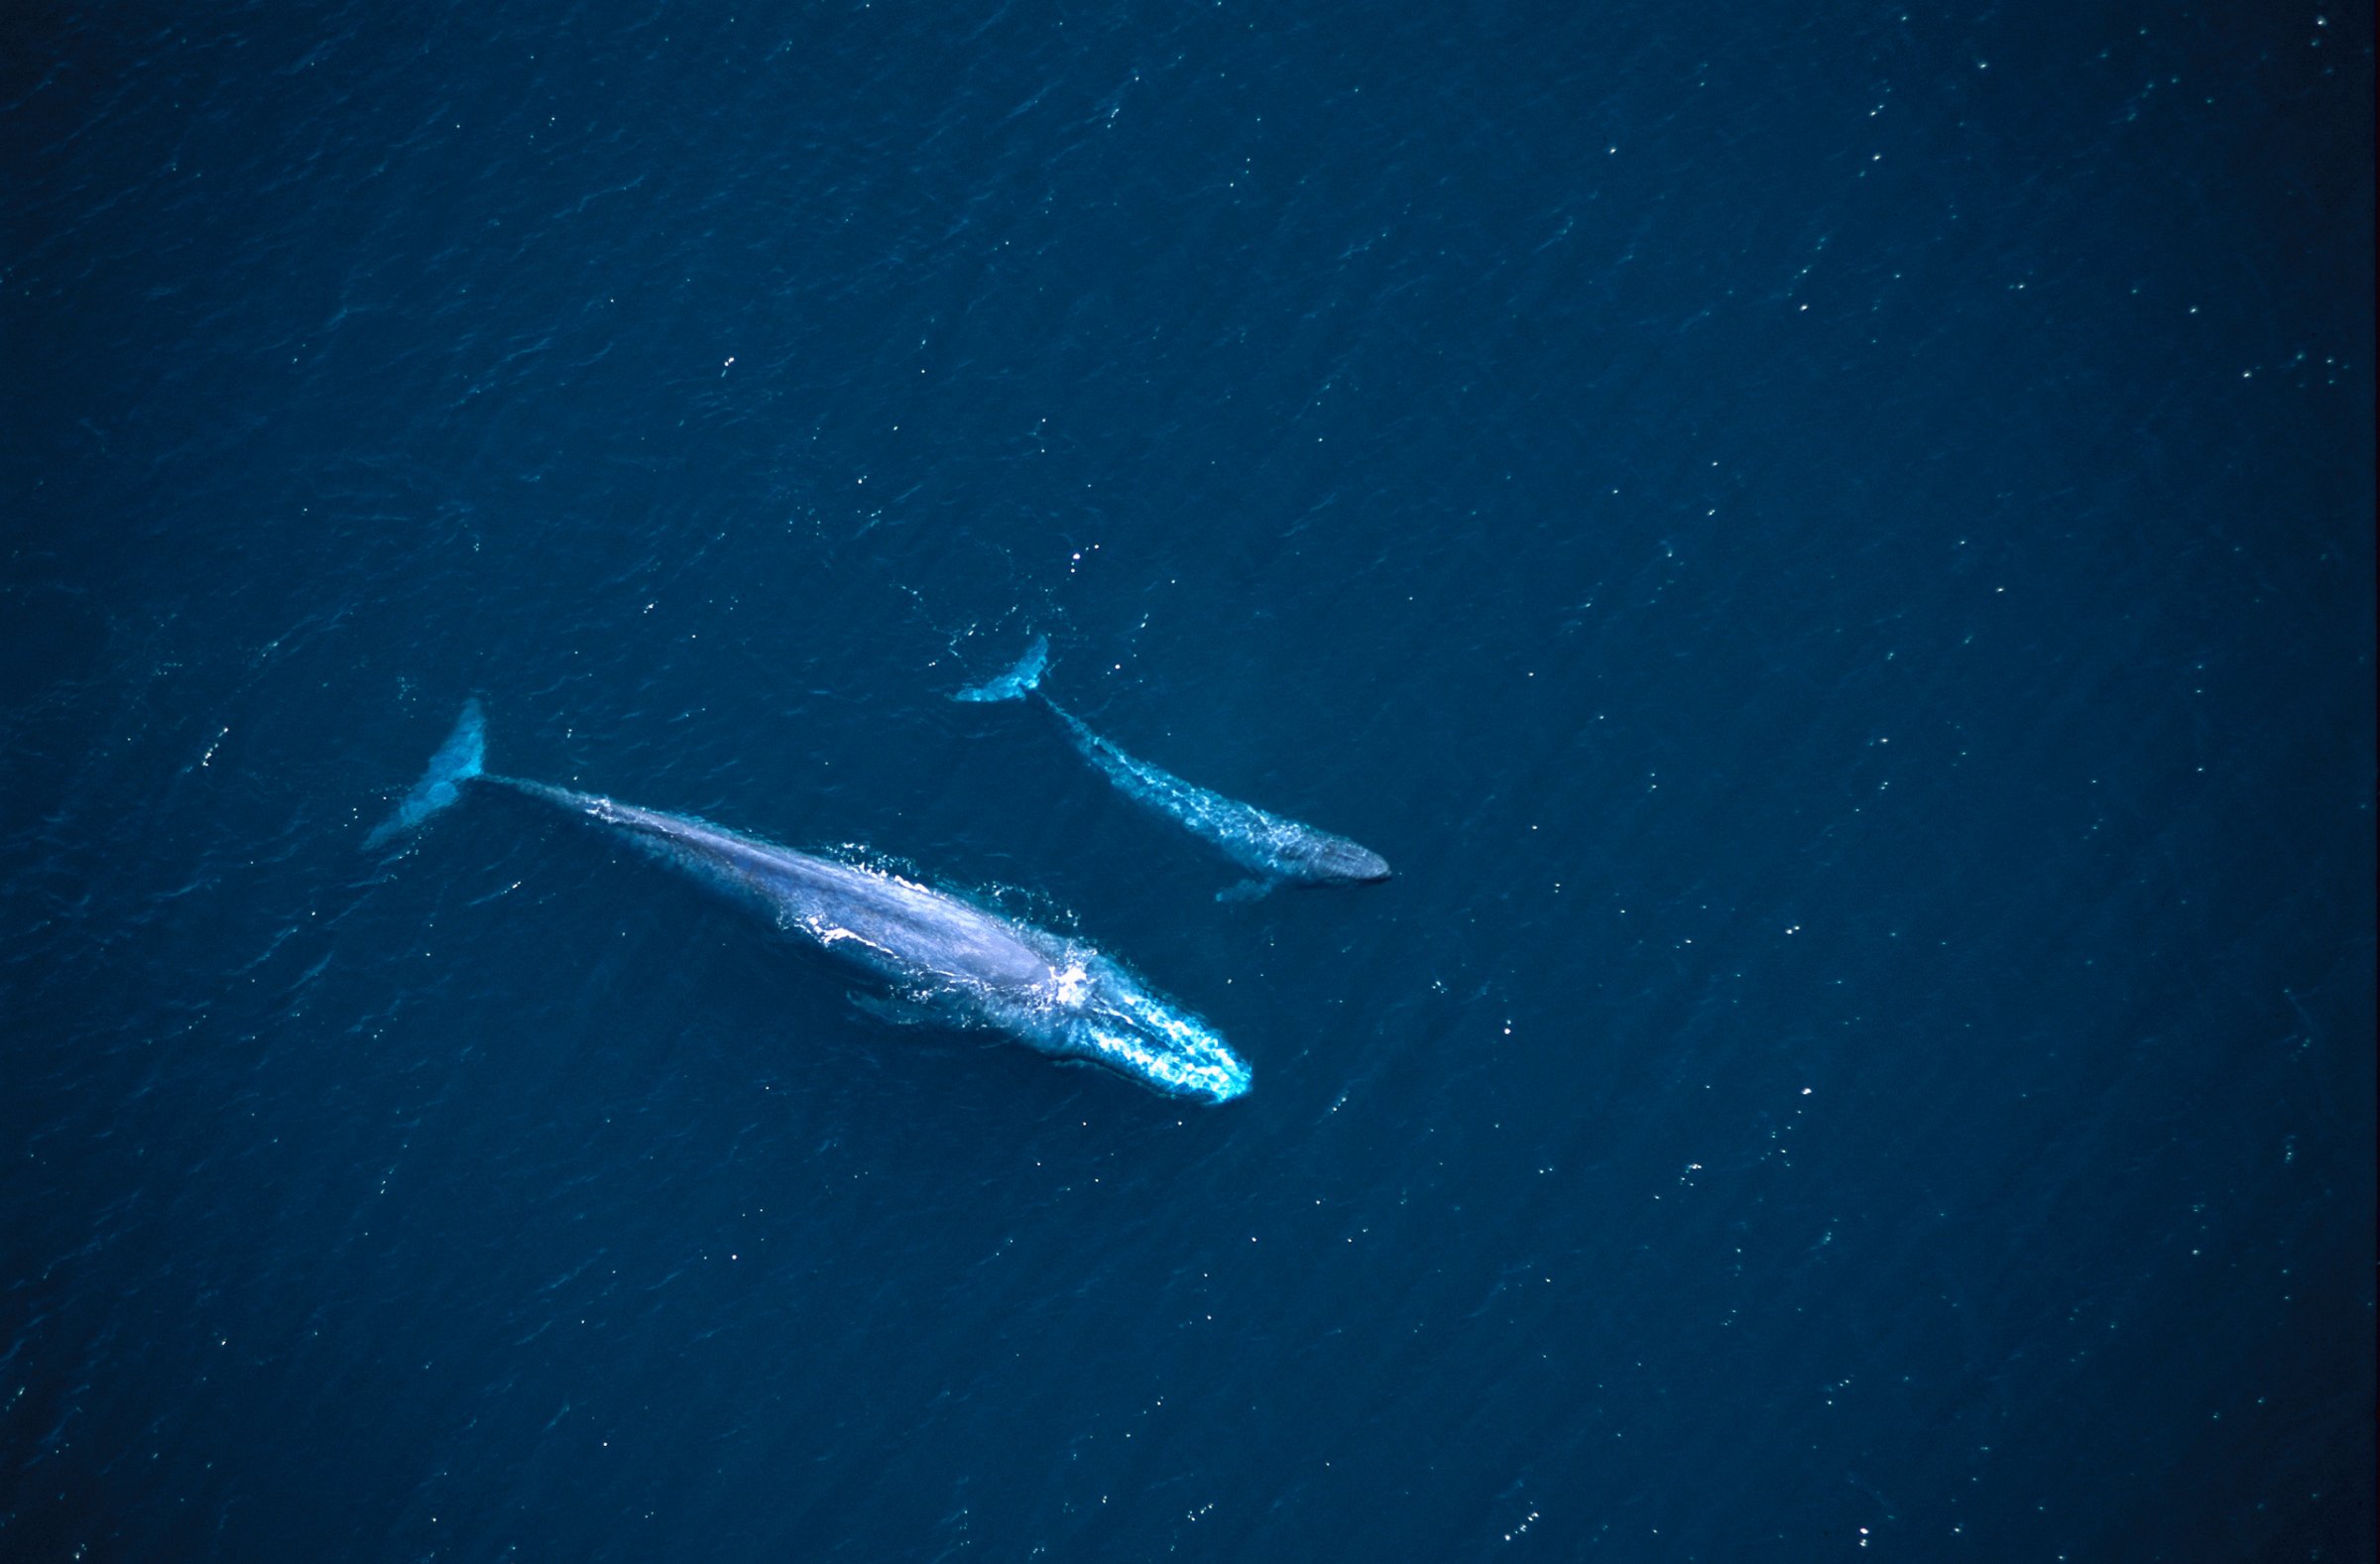 Blue Whale (Balaenoptera musculus), aerial view of mother and calf swimming near the surface in the Gulf of California, Mexico